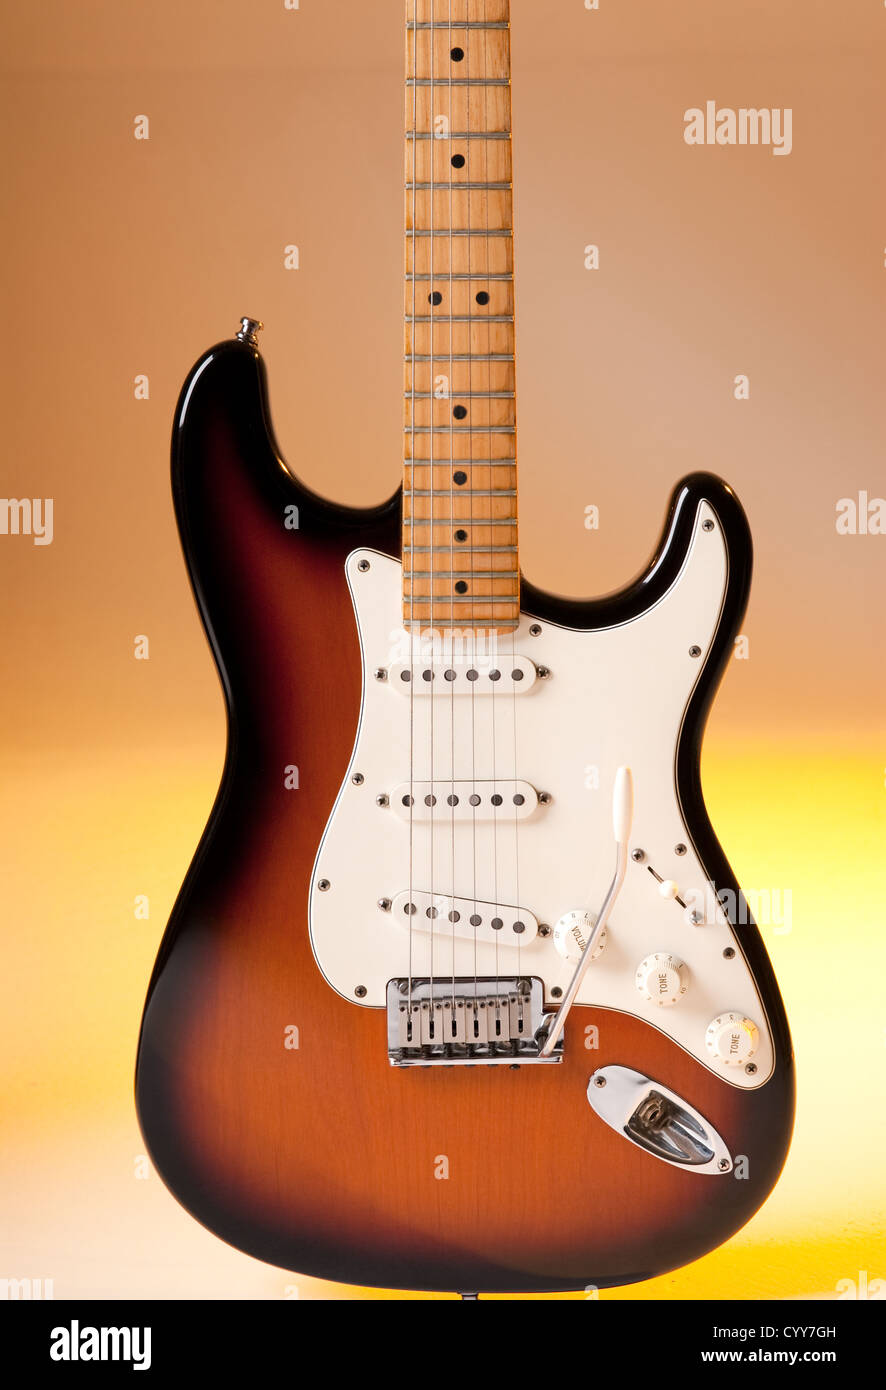 Electric guitar detail with multicolour lighting. Stock Photo